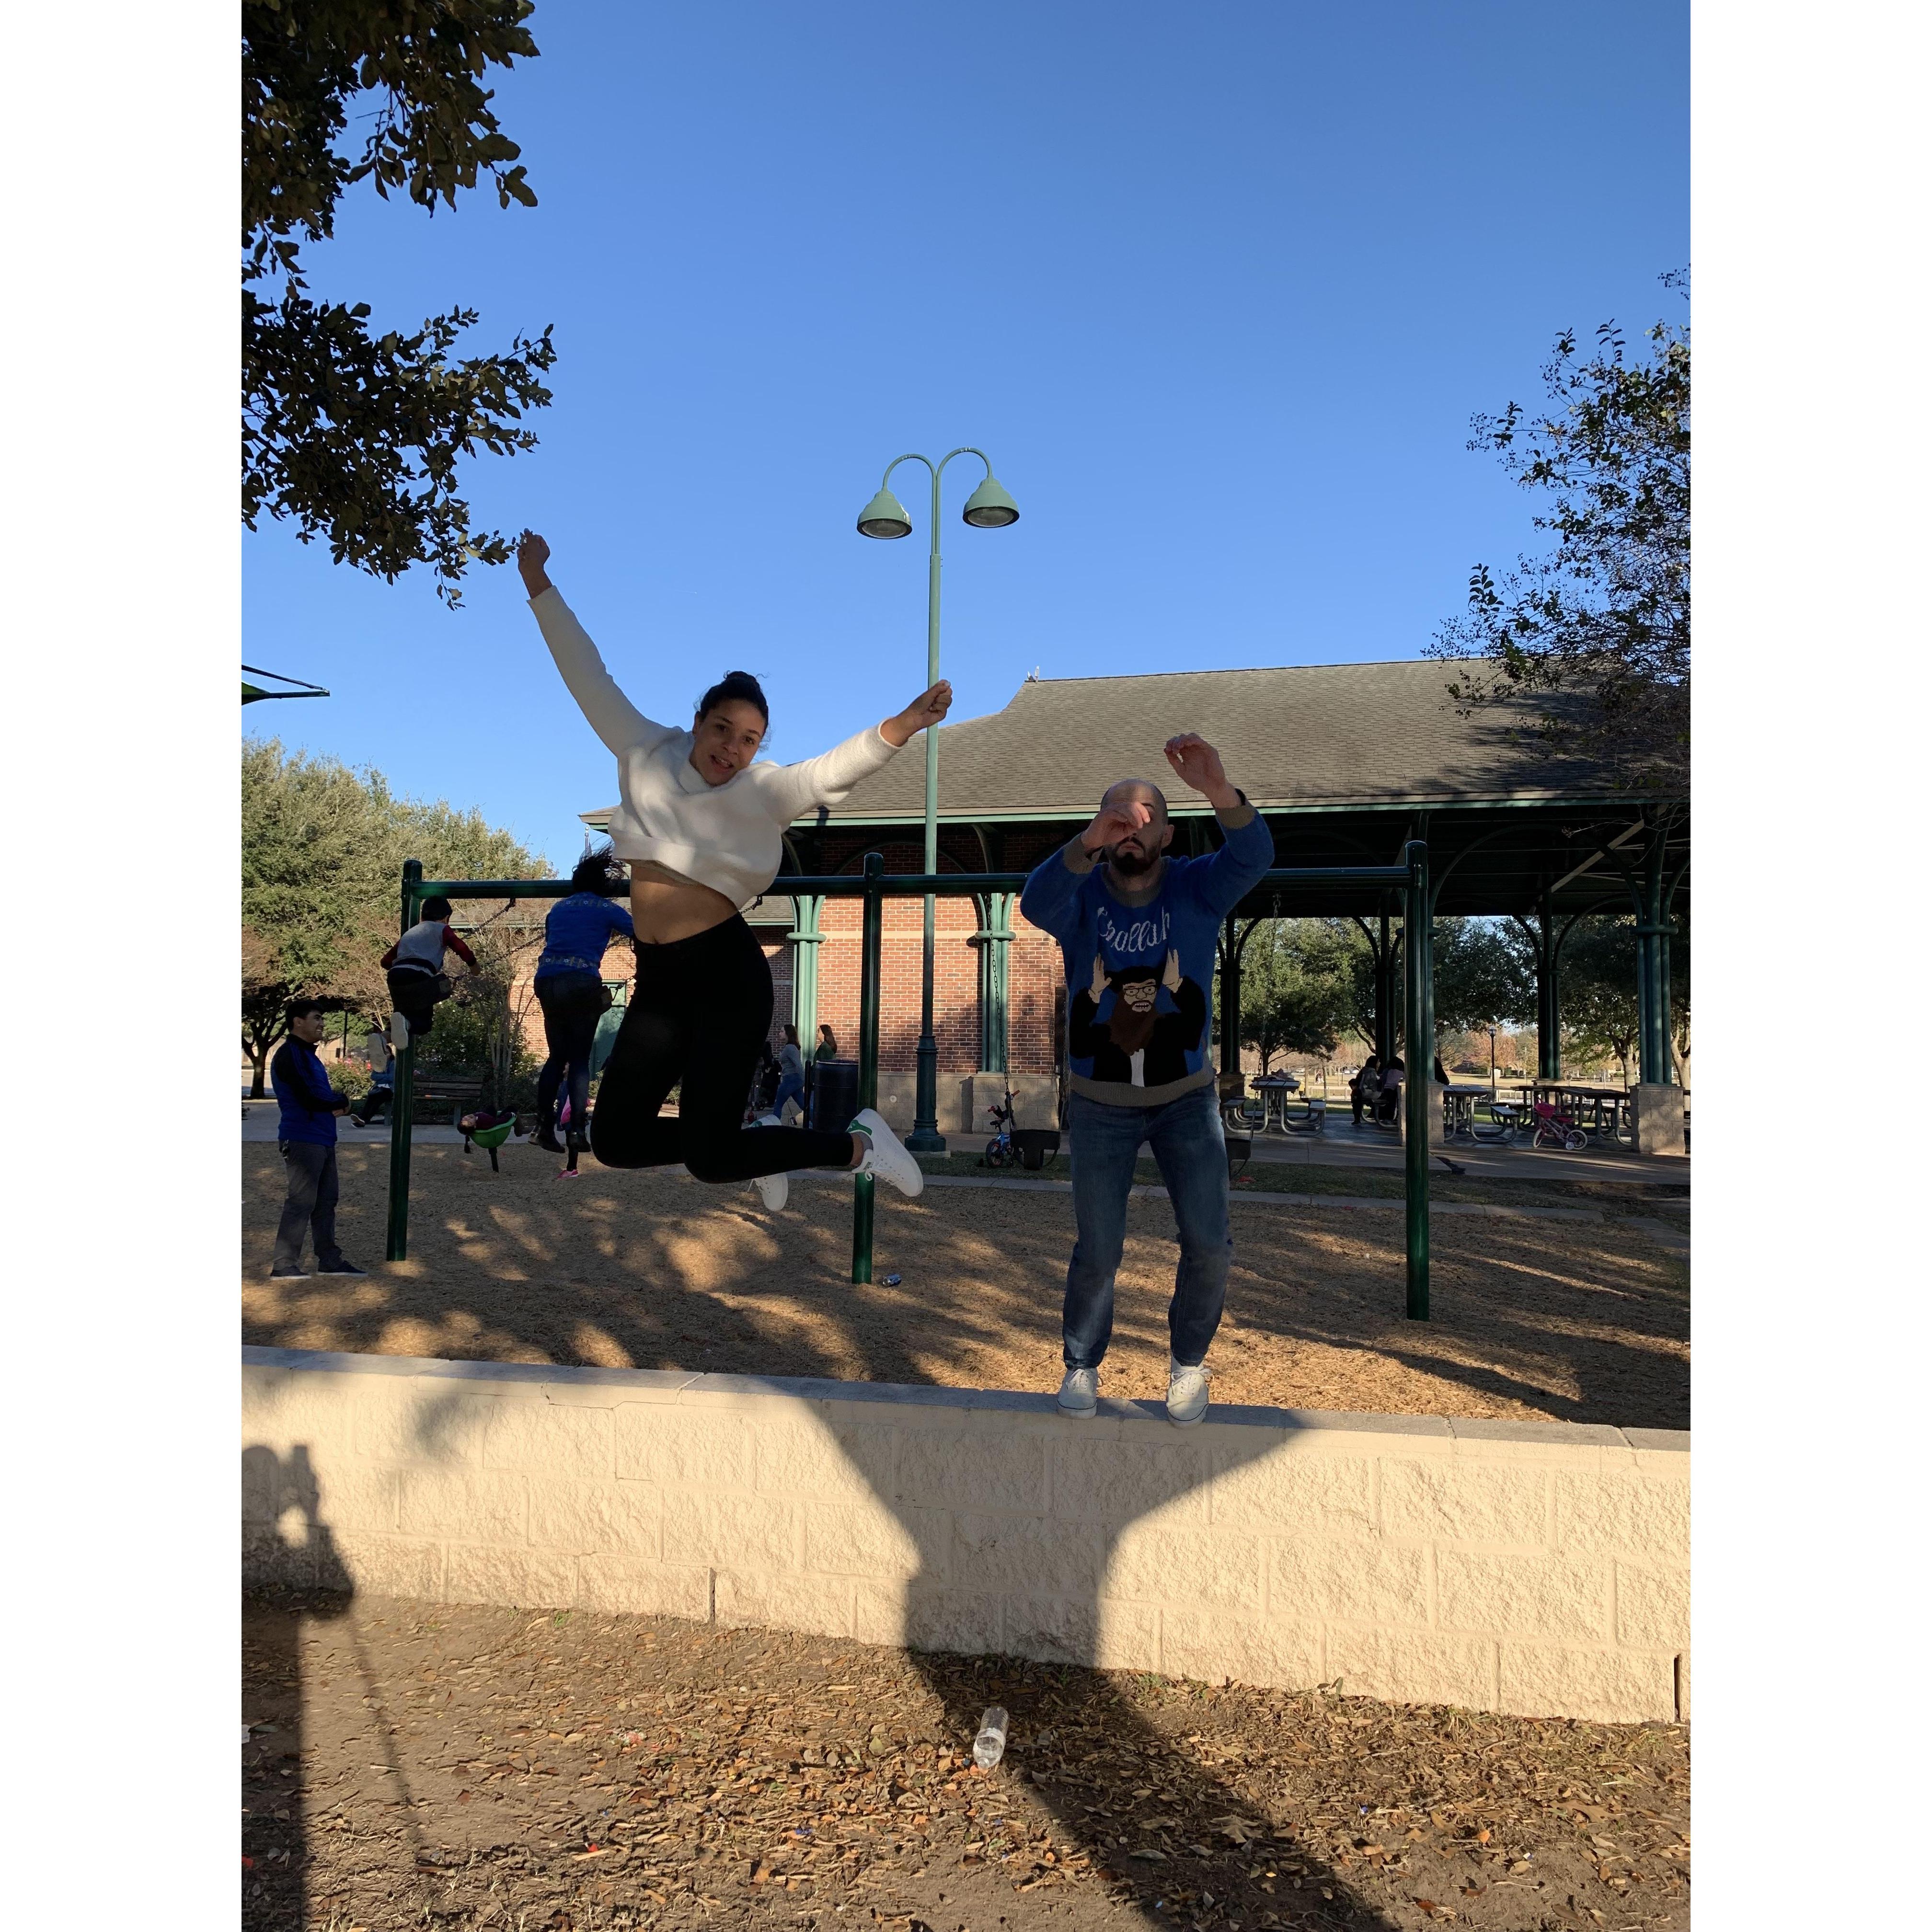 Working on a "jump" photo while visiting David's family in Sugarland, Texas